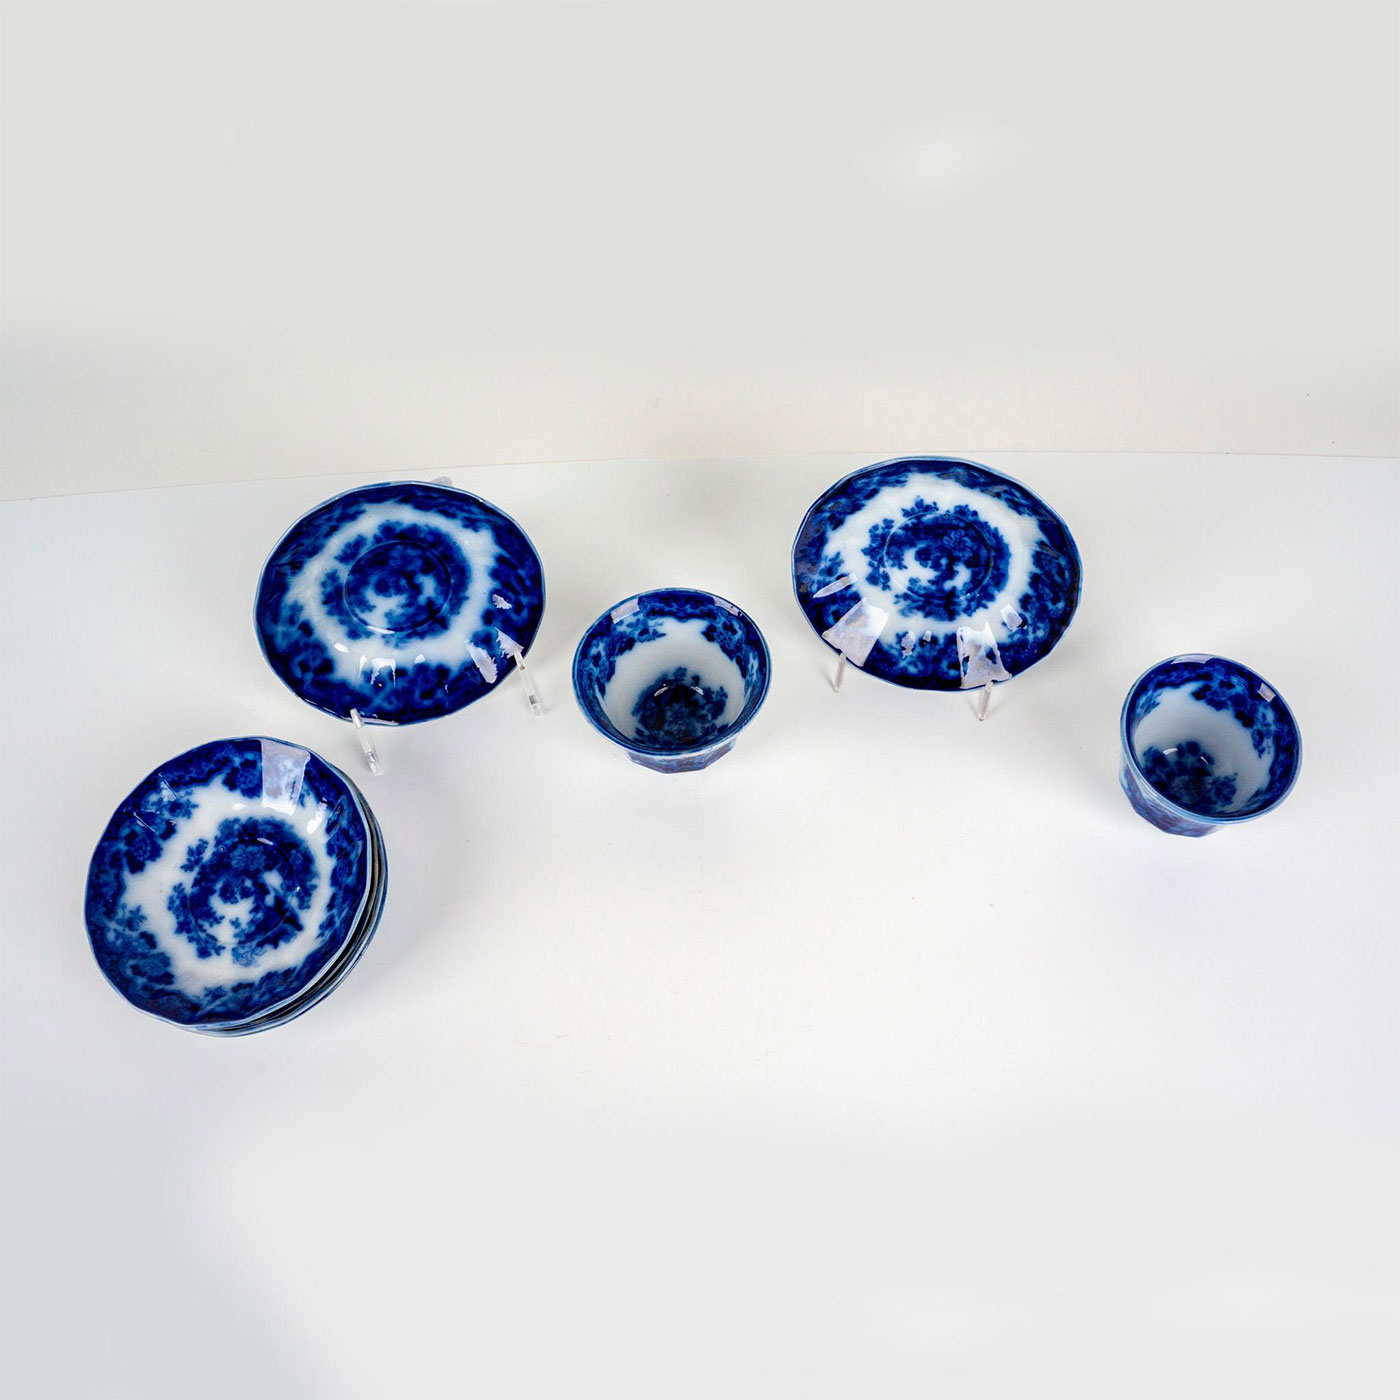 8pc Antique Flow Blue Sobraon Cups and Saucers - Image 2 of 4